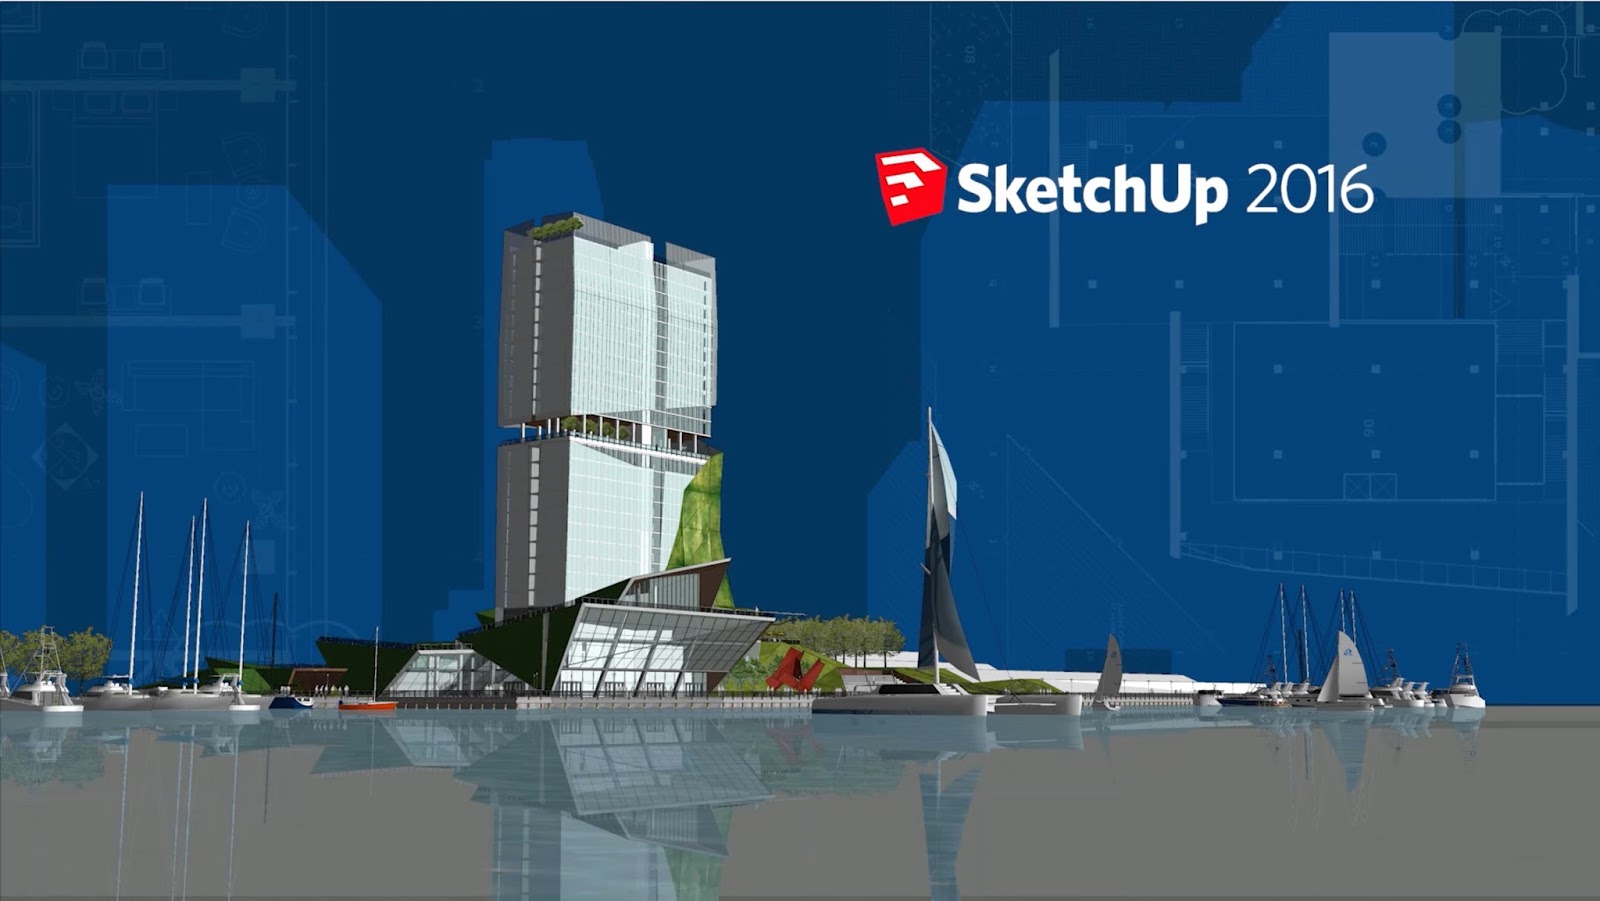 vray 2.0 for sketchup